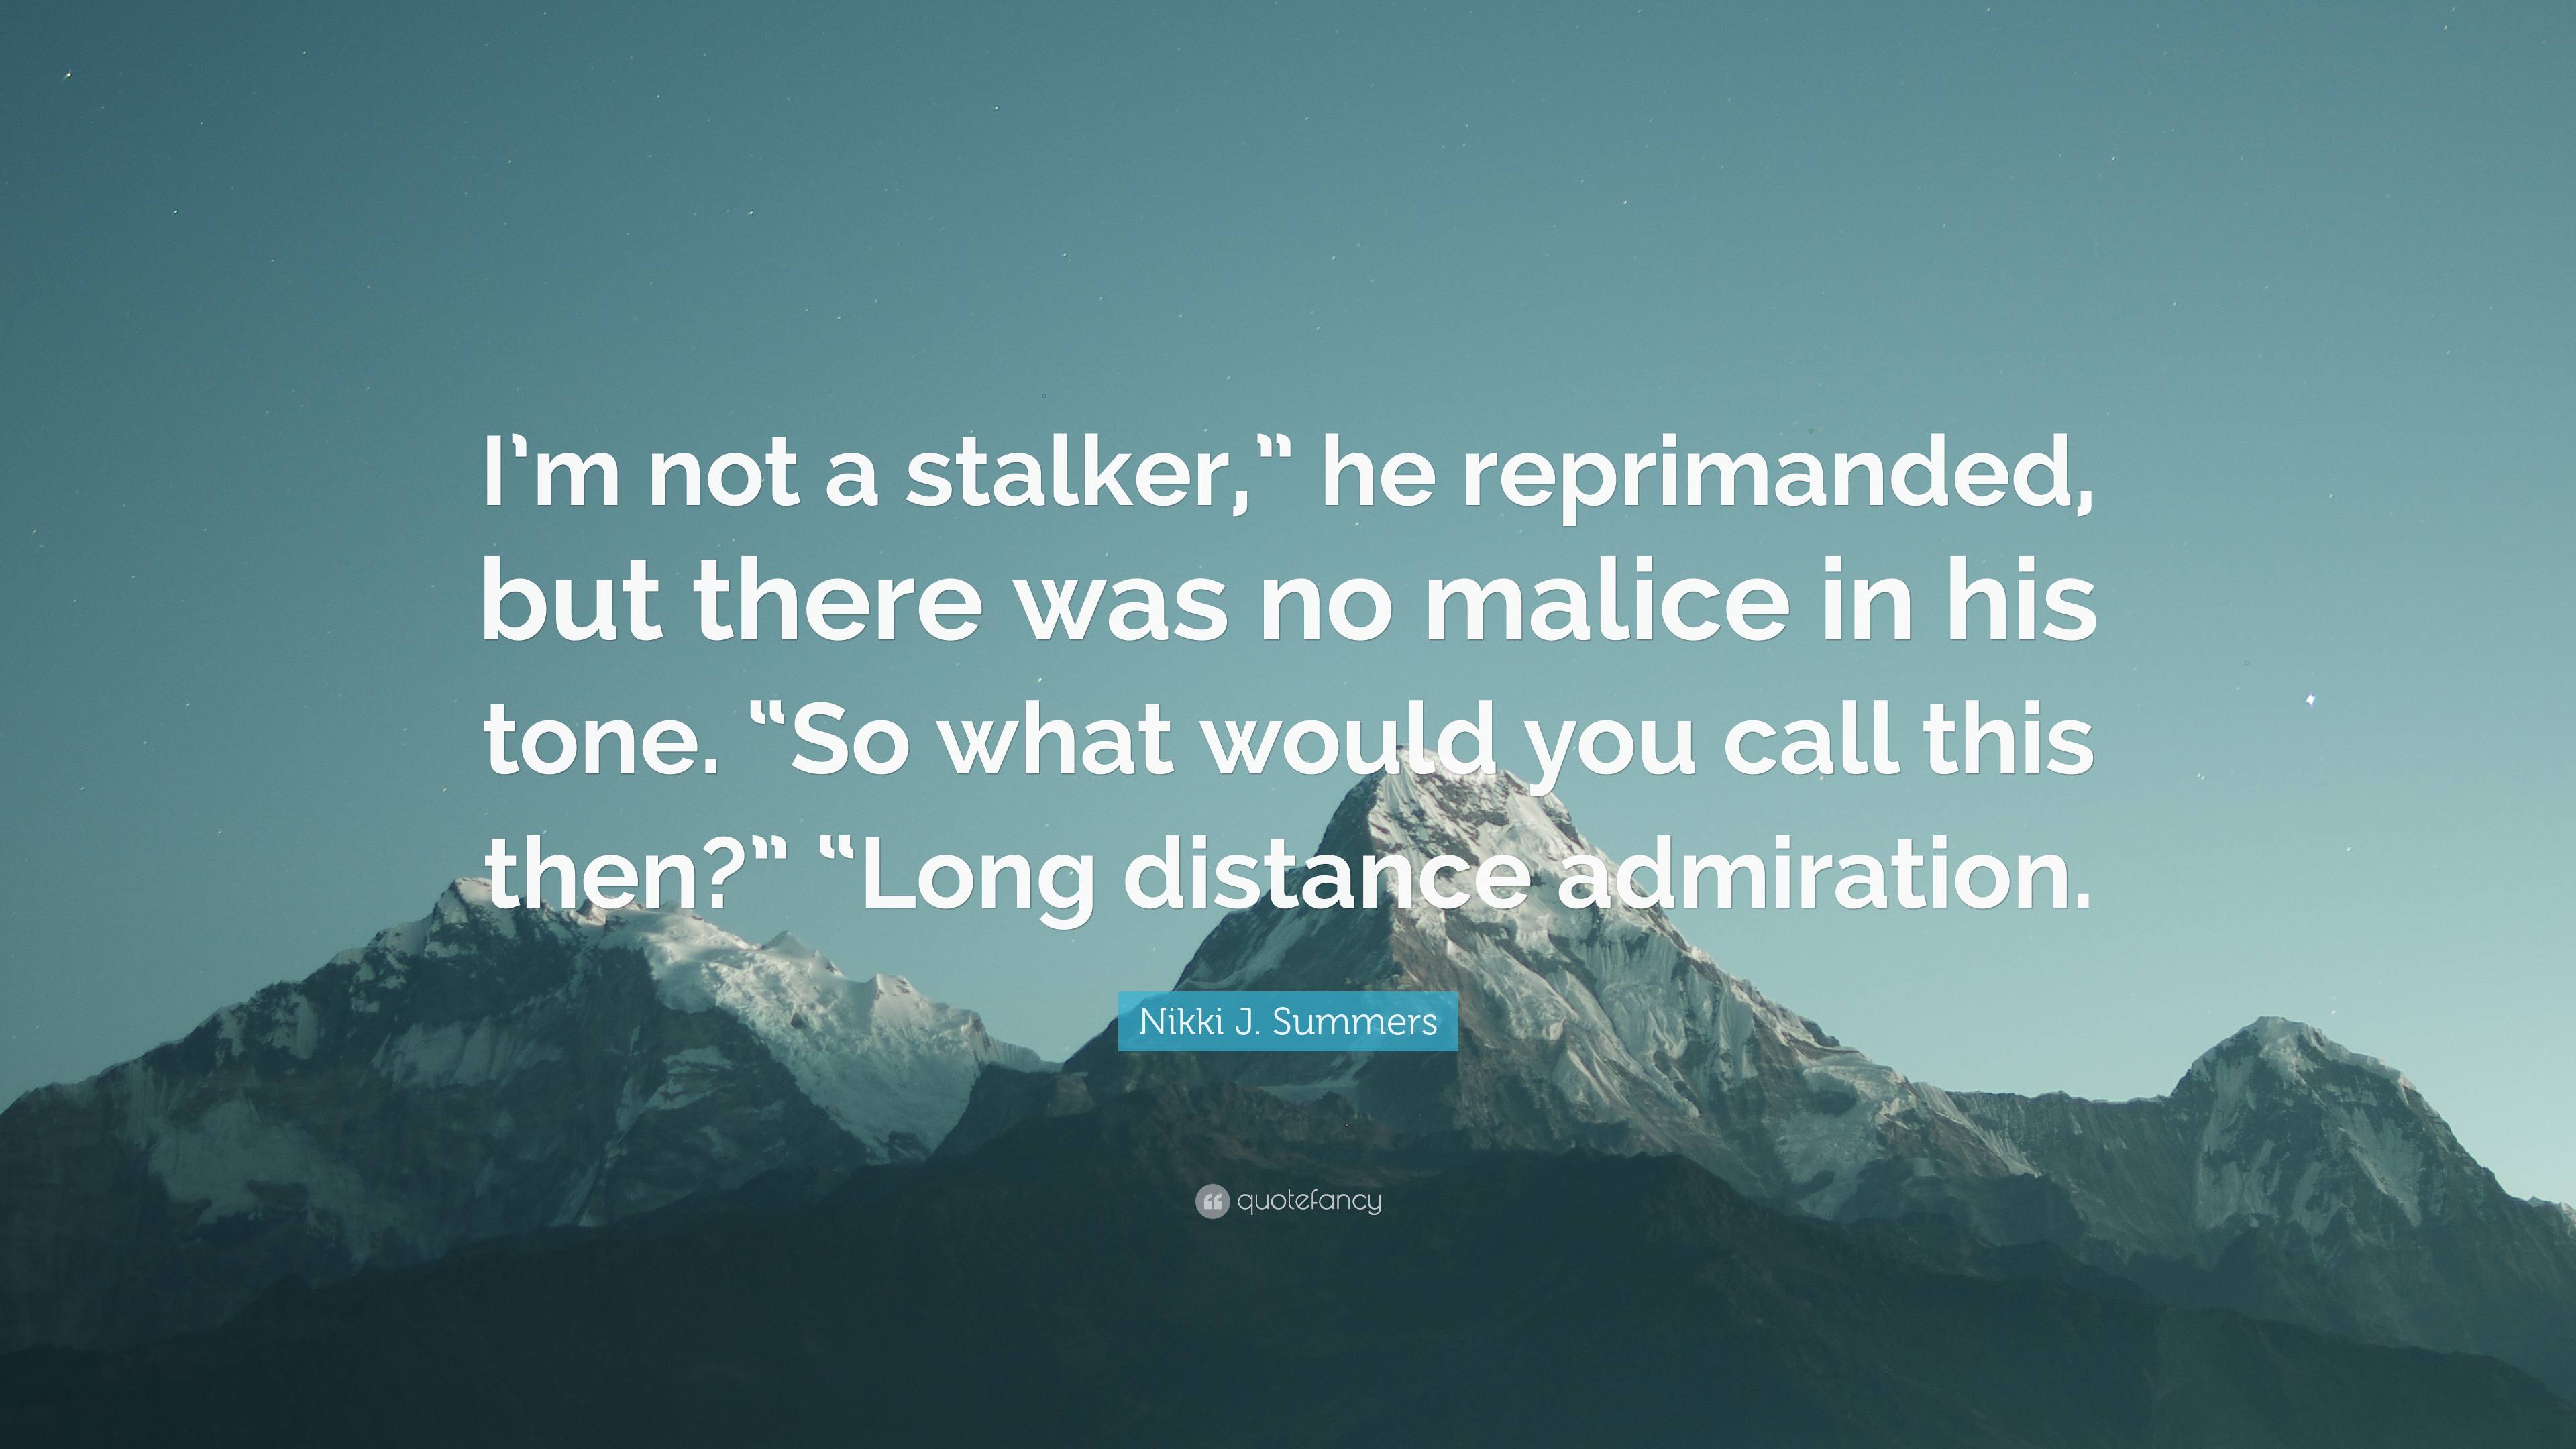 Nikki J. Summers Quote: “I'm not a stalker,” he reprimanded, but there was  no malice in his tone. “So what would you call this then?” “Long dista...”